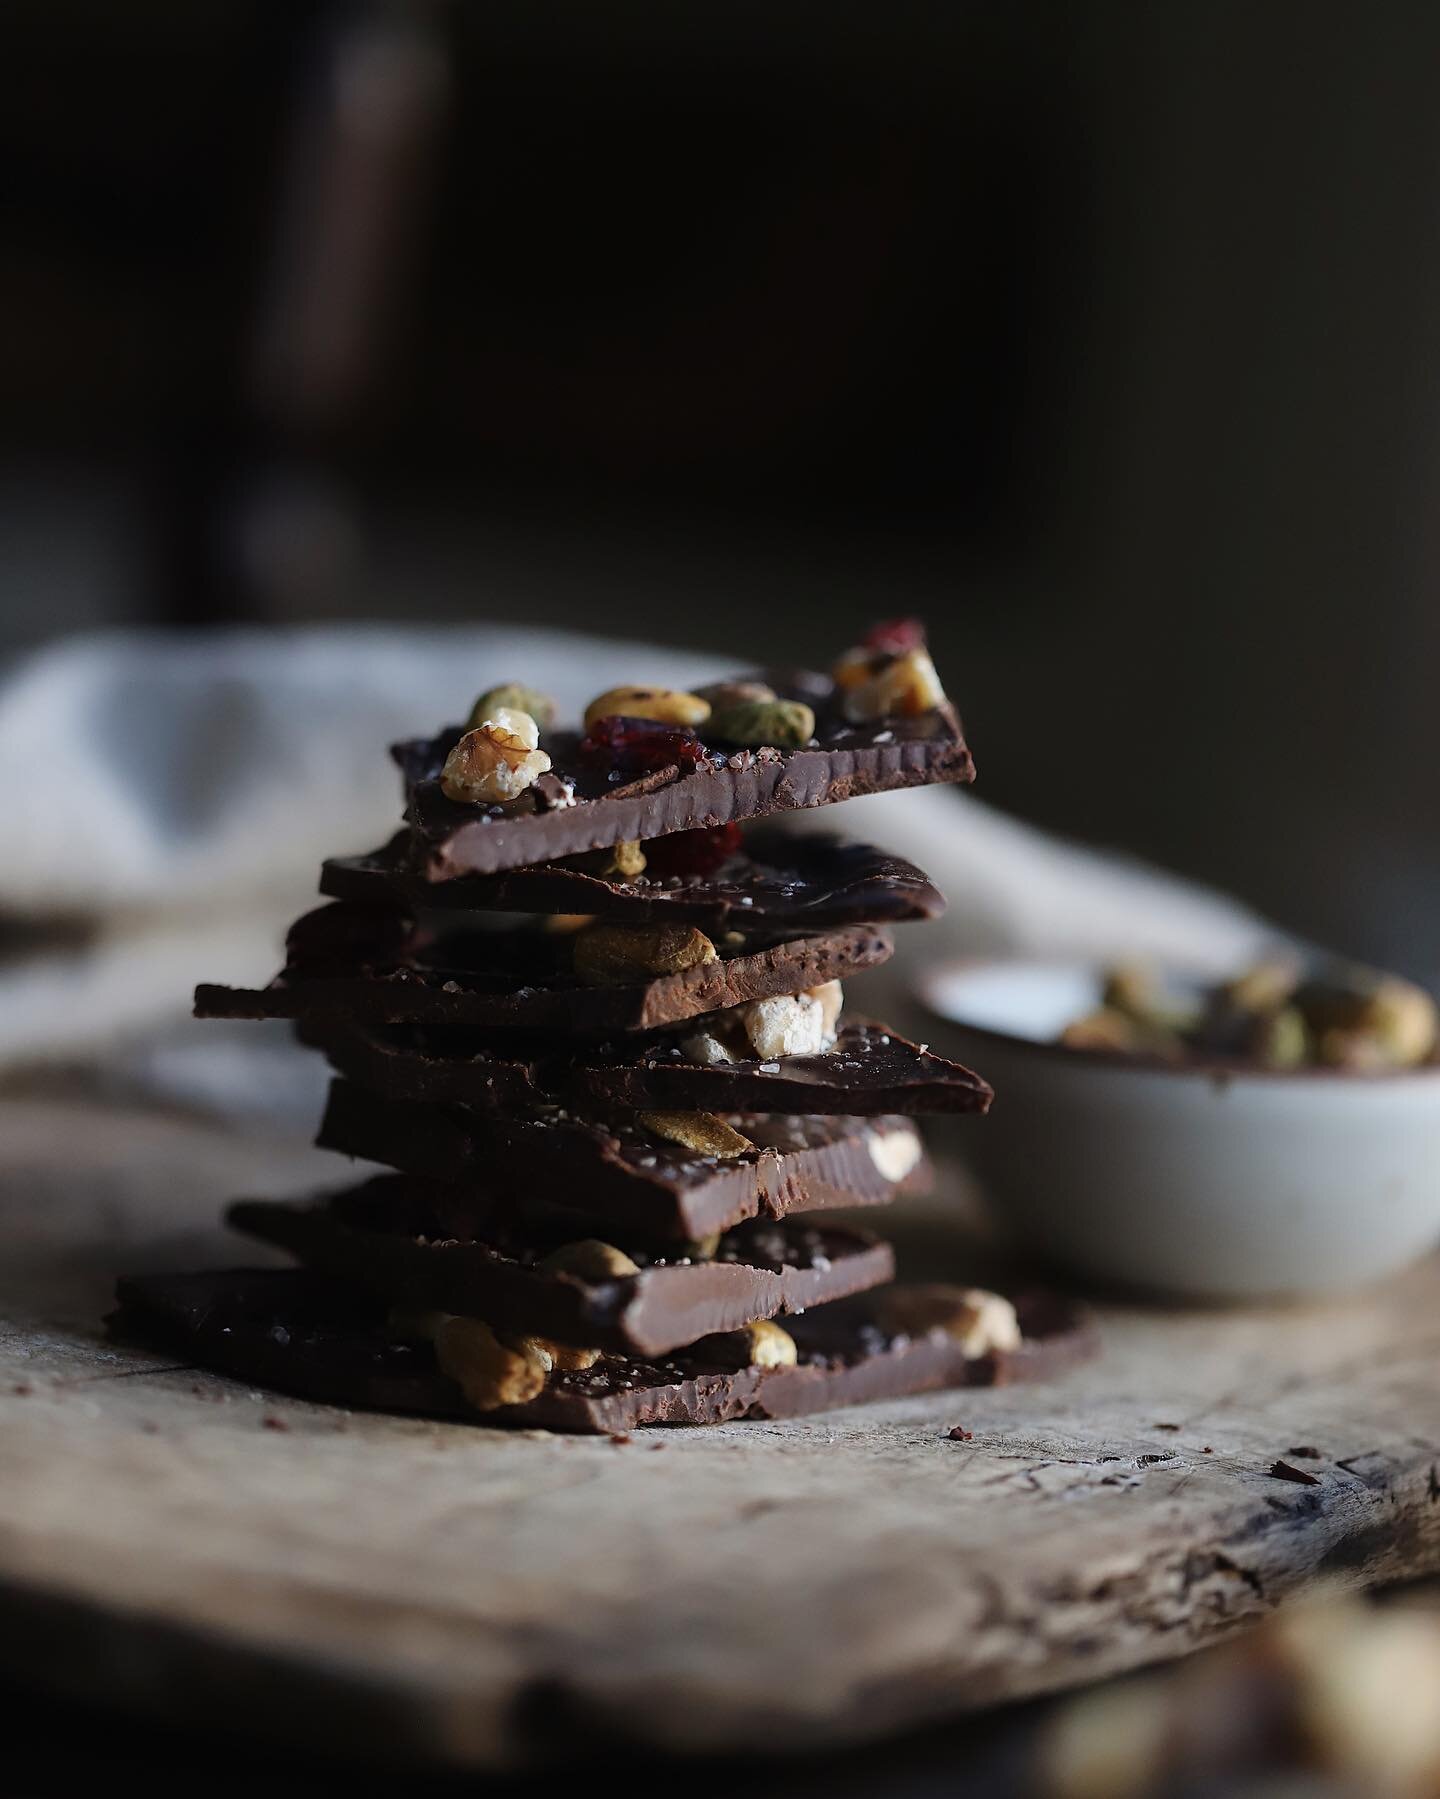 Our favorite pantry clean-out dark chocolate bark and also how we use up the last bits of nuts, seeds, and dried fruit in our cupboards. If you add coarse sea salt to your bark, I promise you won&rsquo;t regret it!
&bull;&bull;&bull;
The recipe can b